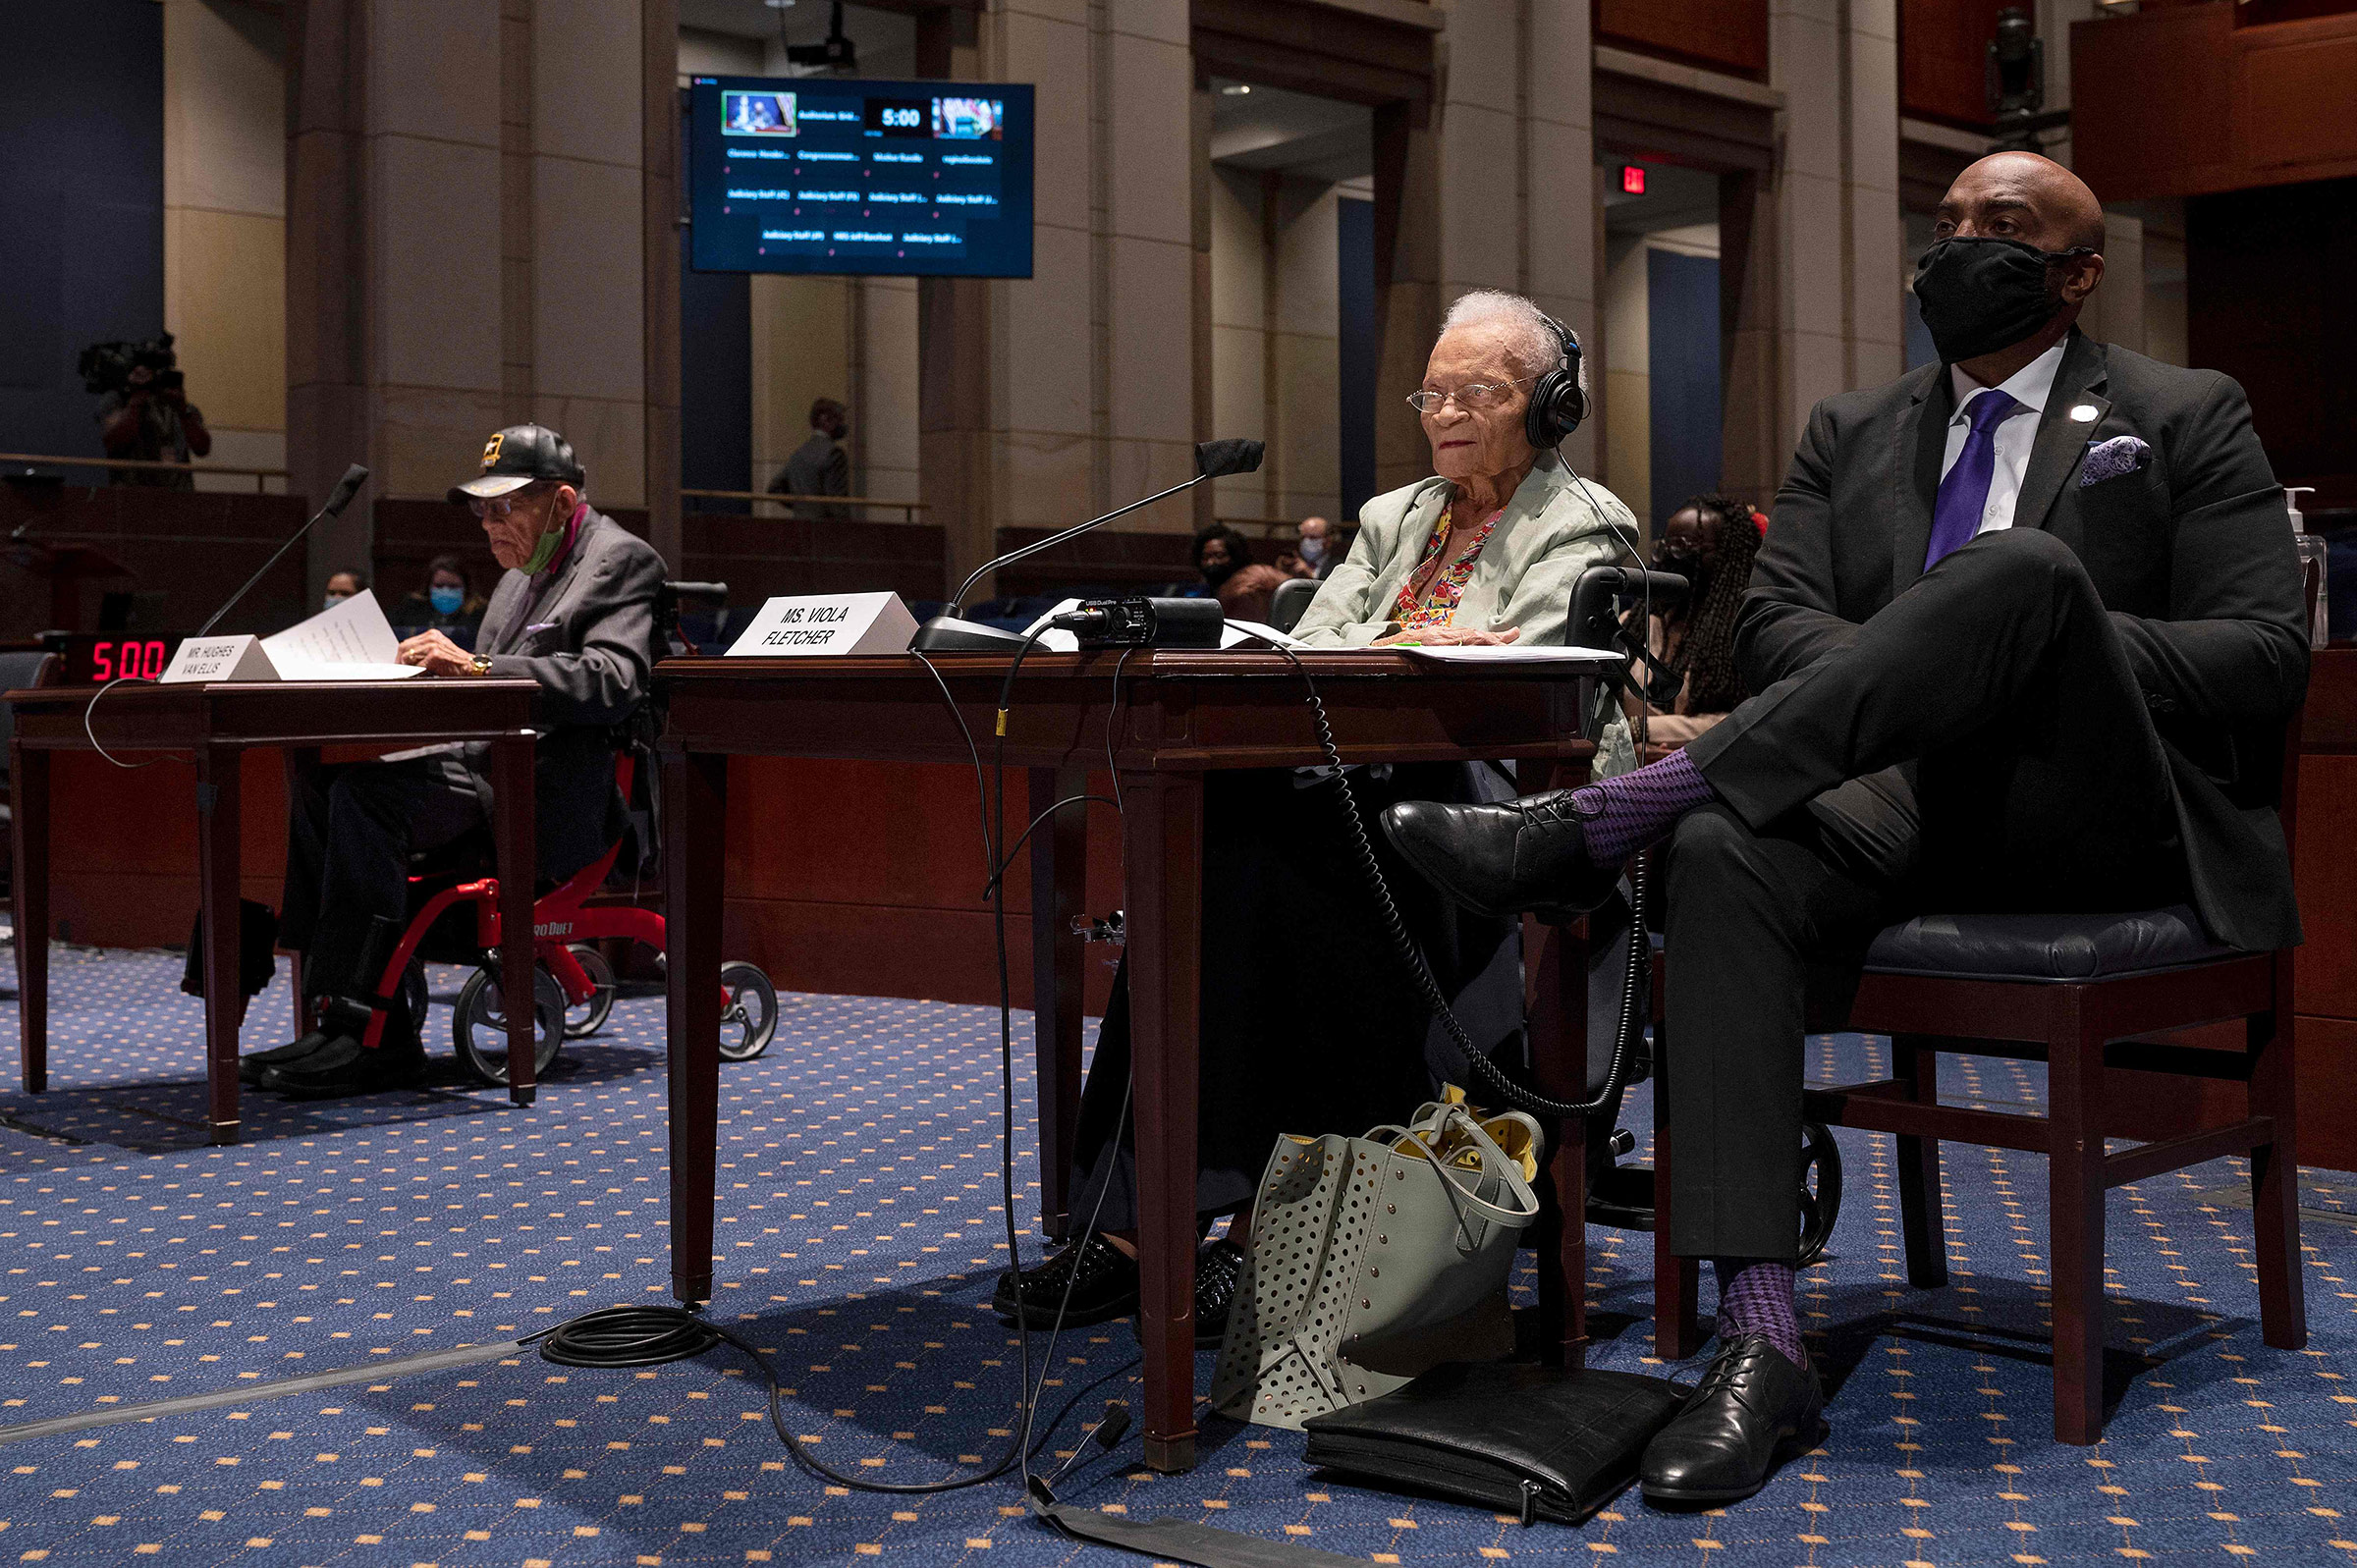 Hughes Van Ellis (left), a Tulsa Race Massacre survivor, and Viola Fletcher, the oldest living survivor, testify before the Civil Rights and Civil Liberties Subcommittee hearing on "Continuing Injustice: The Centennial of the Tulsa-Greenwood Race Massacre" on Capitol Hill in Washington, D.C., on May 19, 2021. (Jim Watson—AFP/Getty Images)